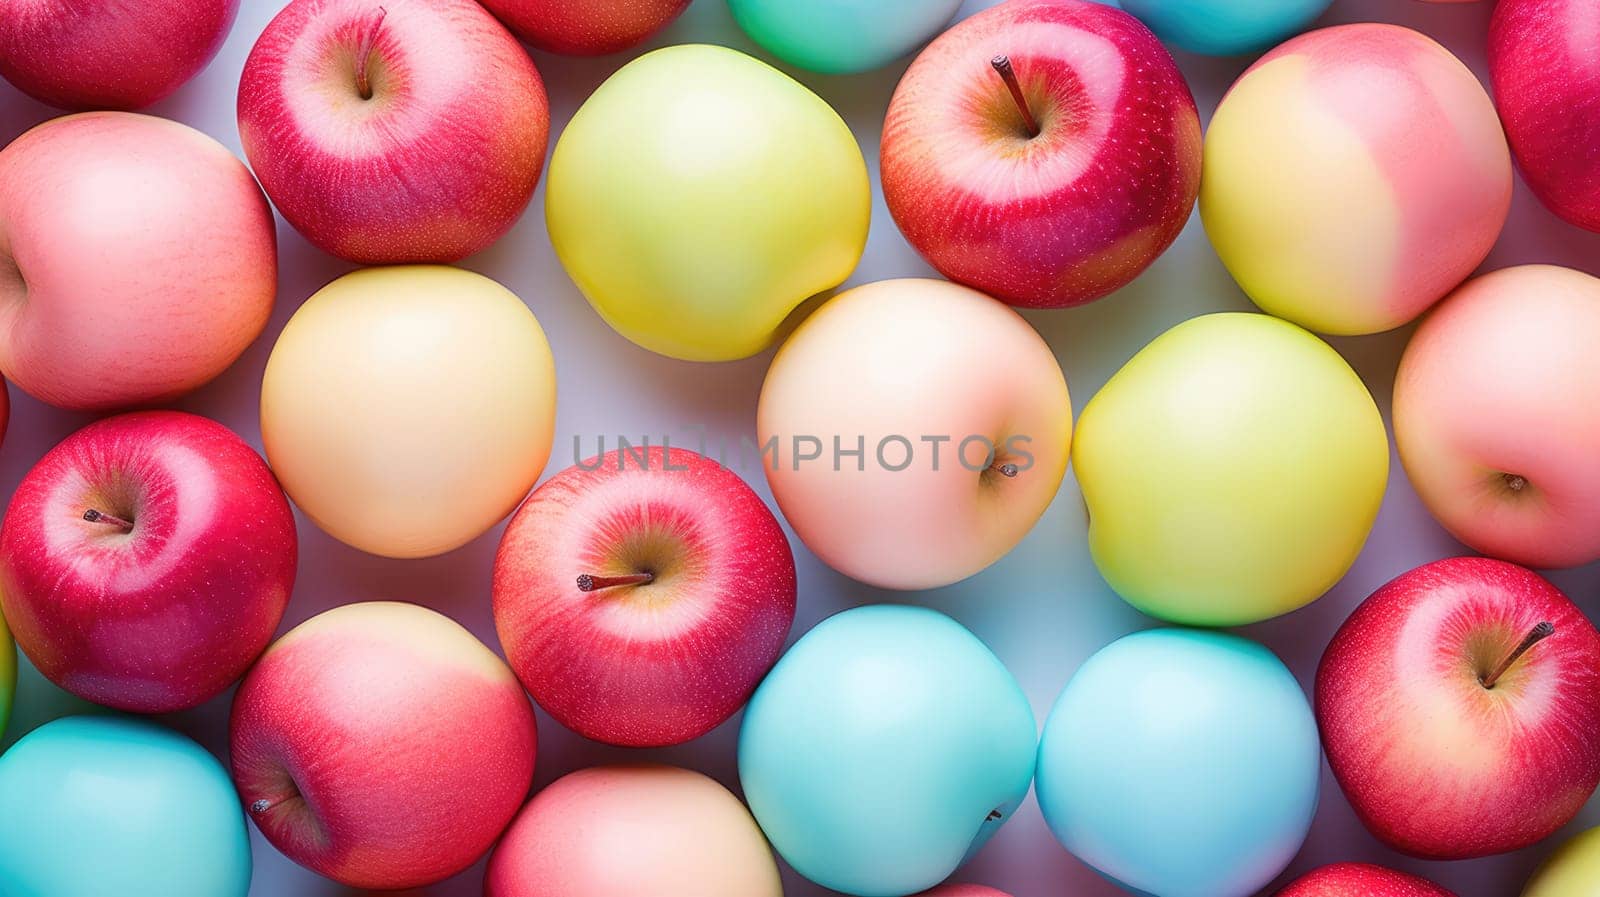 Background of apples in pastel colors by natali_brill